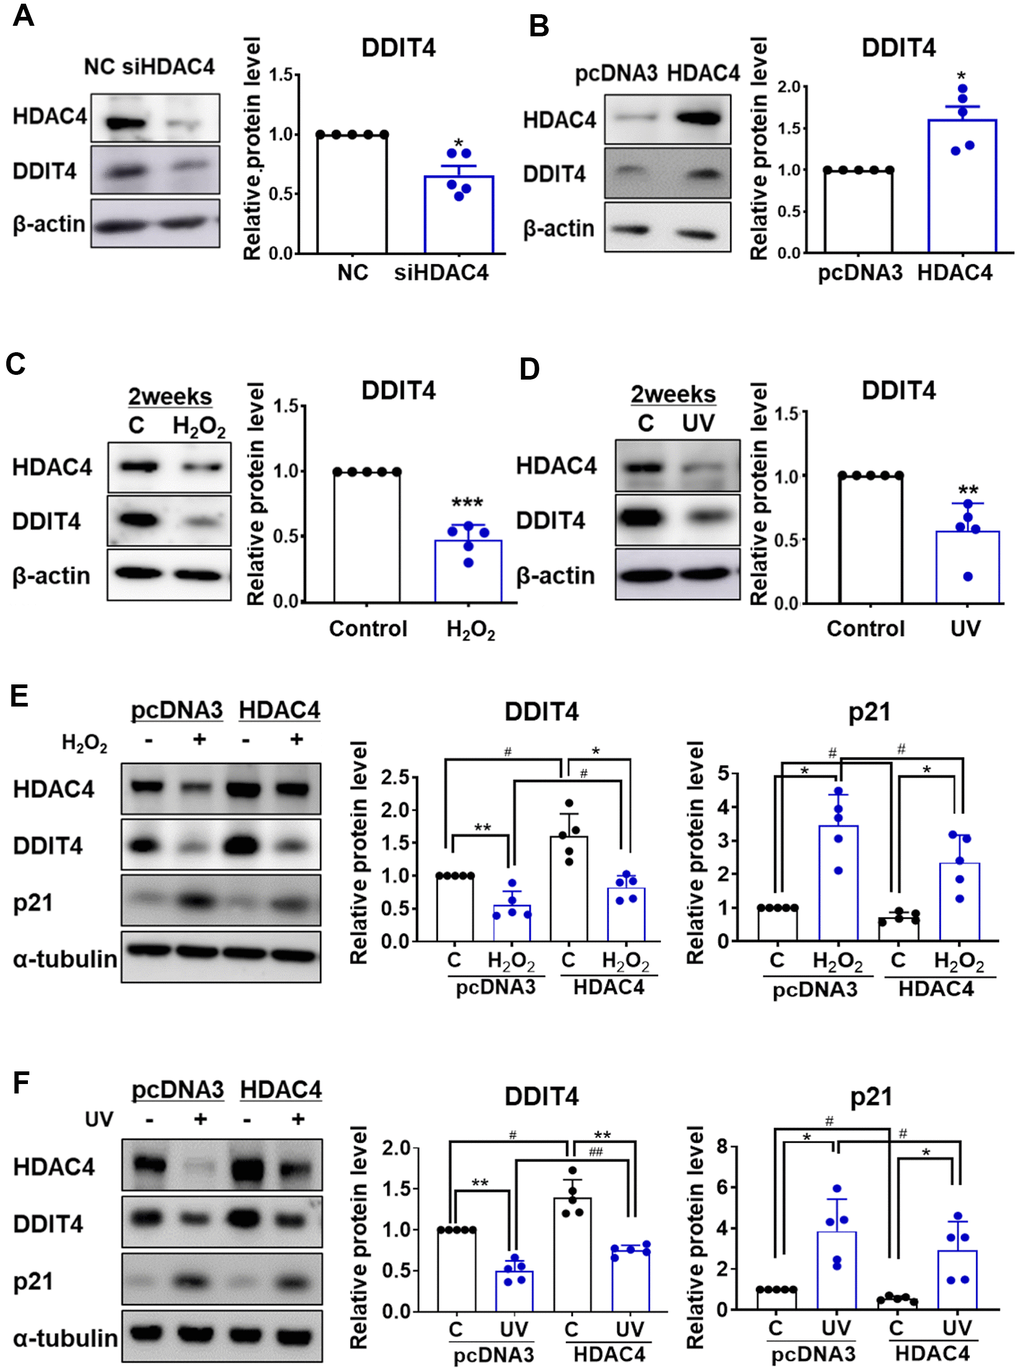 Senescence-induced reduction of DDIT4 is restored by HDAC4 overexpression.  (A) Human dermal fibroblasts were transfected with negative control scrambled siRNA (NC) or HDAC4 siRNA. (B) For overexpression of HDAC4, cells were treated with pcDNA3 or HDAC4 plasmid DNA and the medium was replaced after 6 h. (A–D) RT-PCR and western blotting were performed to determine the expression of DDIT4 and HDAC4. Data are presented as mean ± SE (n = 5, * P E, F) After senescence was induced, cells were transfected with pcDNA3 or HDAC4 overexpression vector. DDIT4, p21, and HDAC4 protein expression were analyzed by western blotting. Beta-actin and alpha-tubulin served as a loading control. Data are presented as mean ± SE using Student’s t-test (n = 5, * P 2O2; # P 